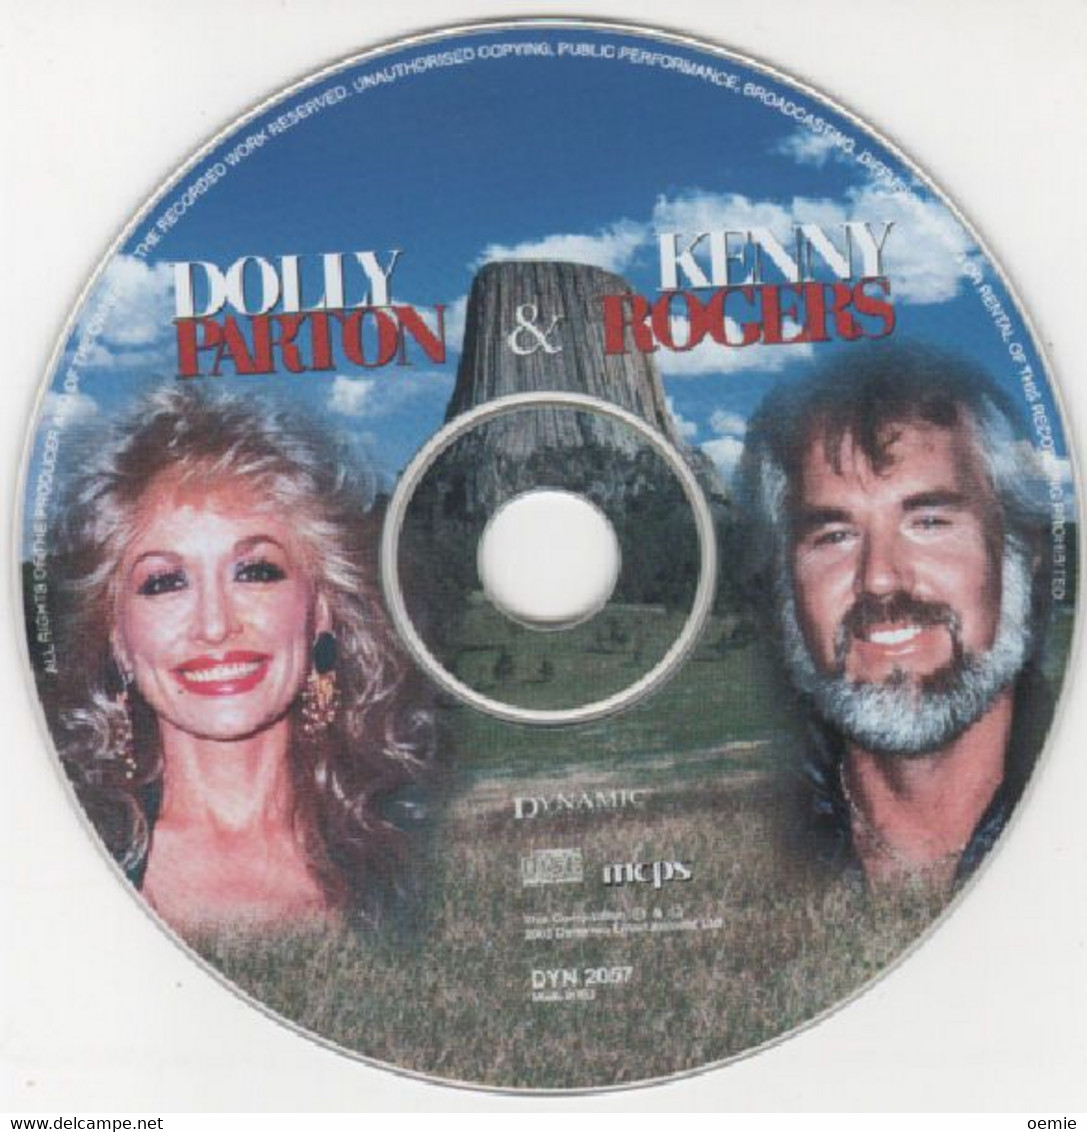 DOLLY  PARTON   &  KENNY  ROGERS   °°°°°   MAKING  BELIEVE   Cd - Country & Folk